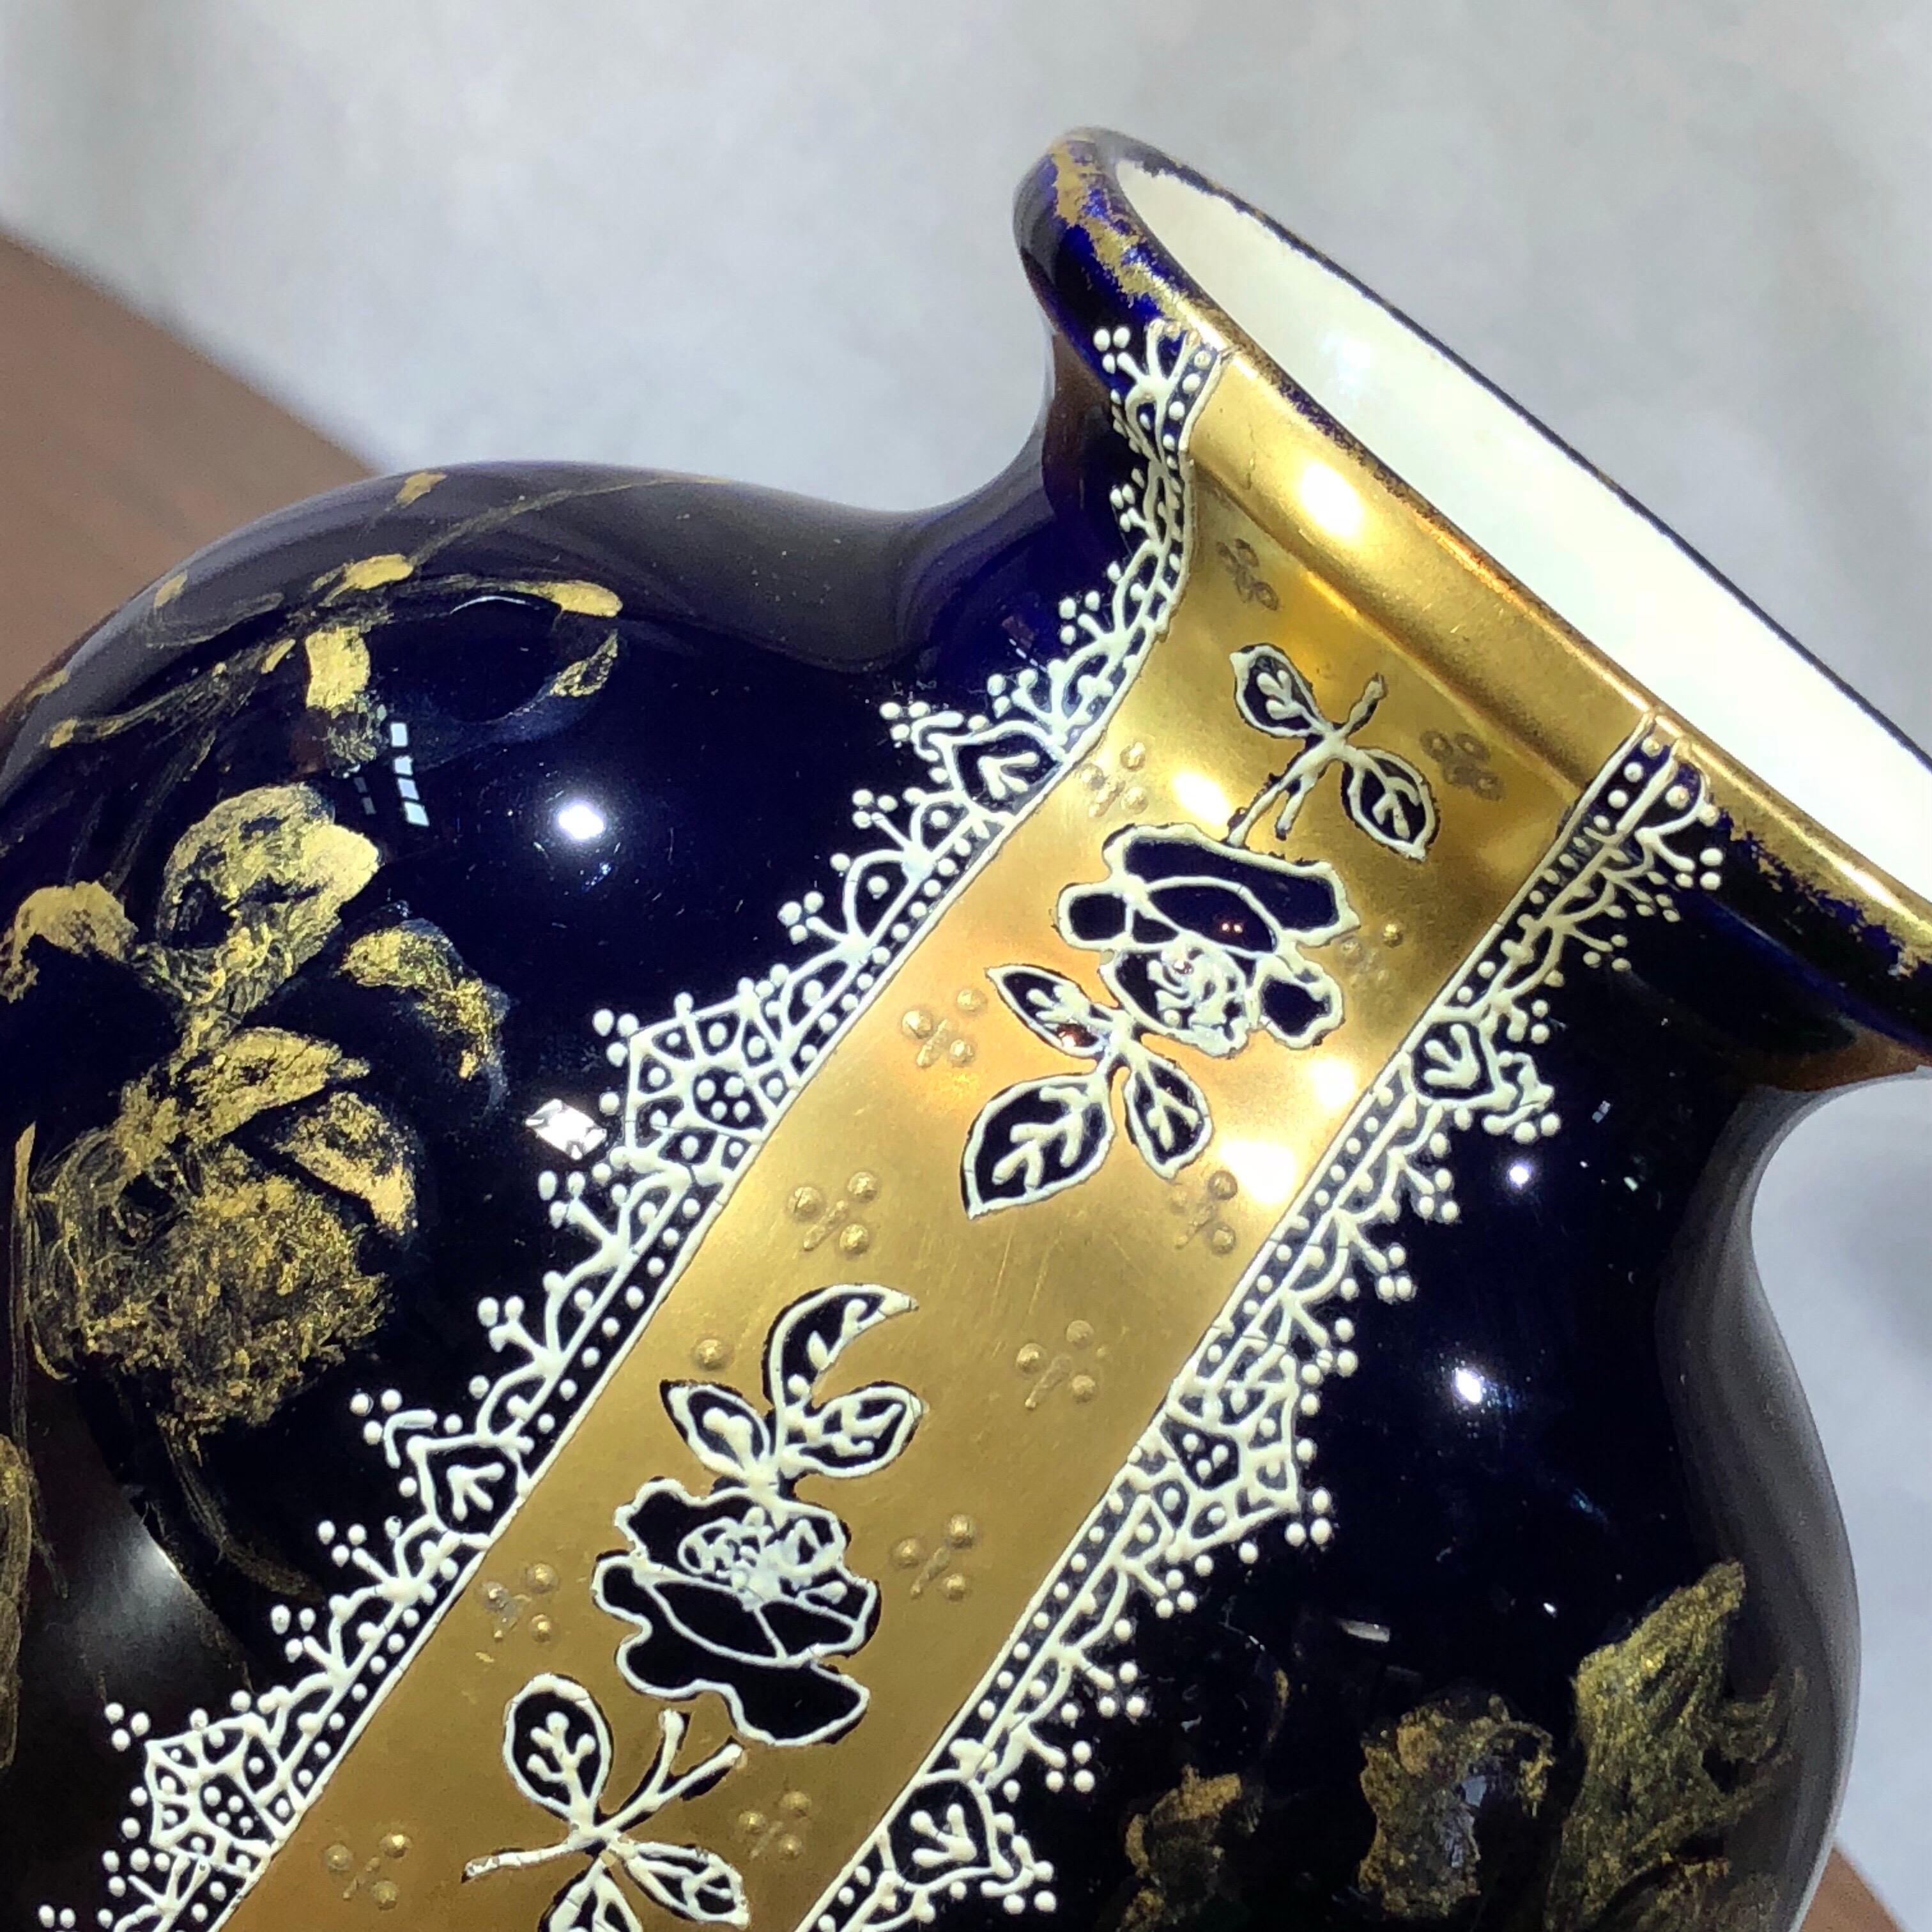 French Choisy Le Roi pottery vase with hand gilded flowers and a central ribbon of gilt with white lace border in enamel on a deep blue ground.
HBC mark “Choisy-le-Roi DECOR No 3' to base, Impressed 1037,
circa 1880.